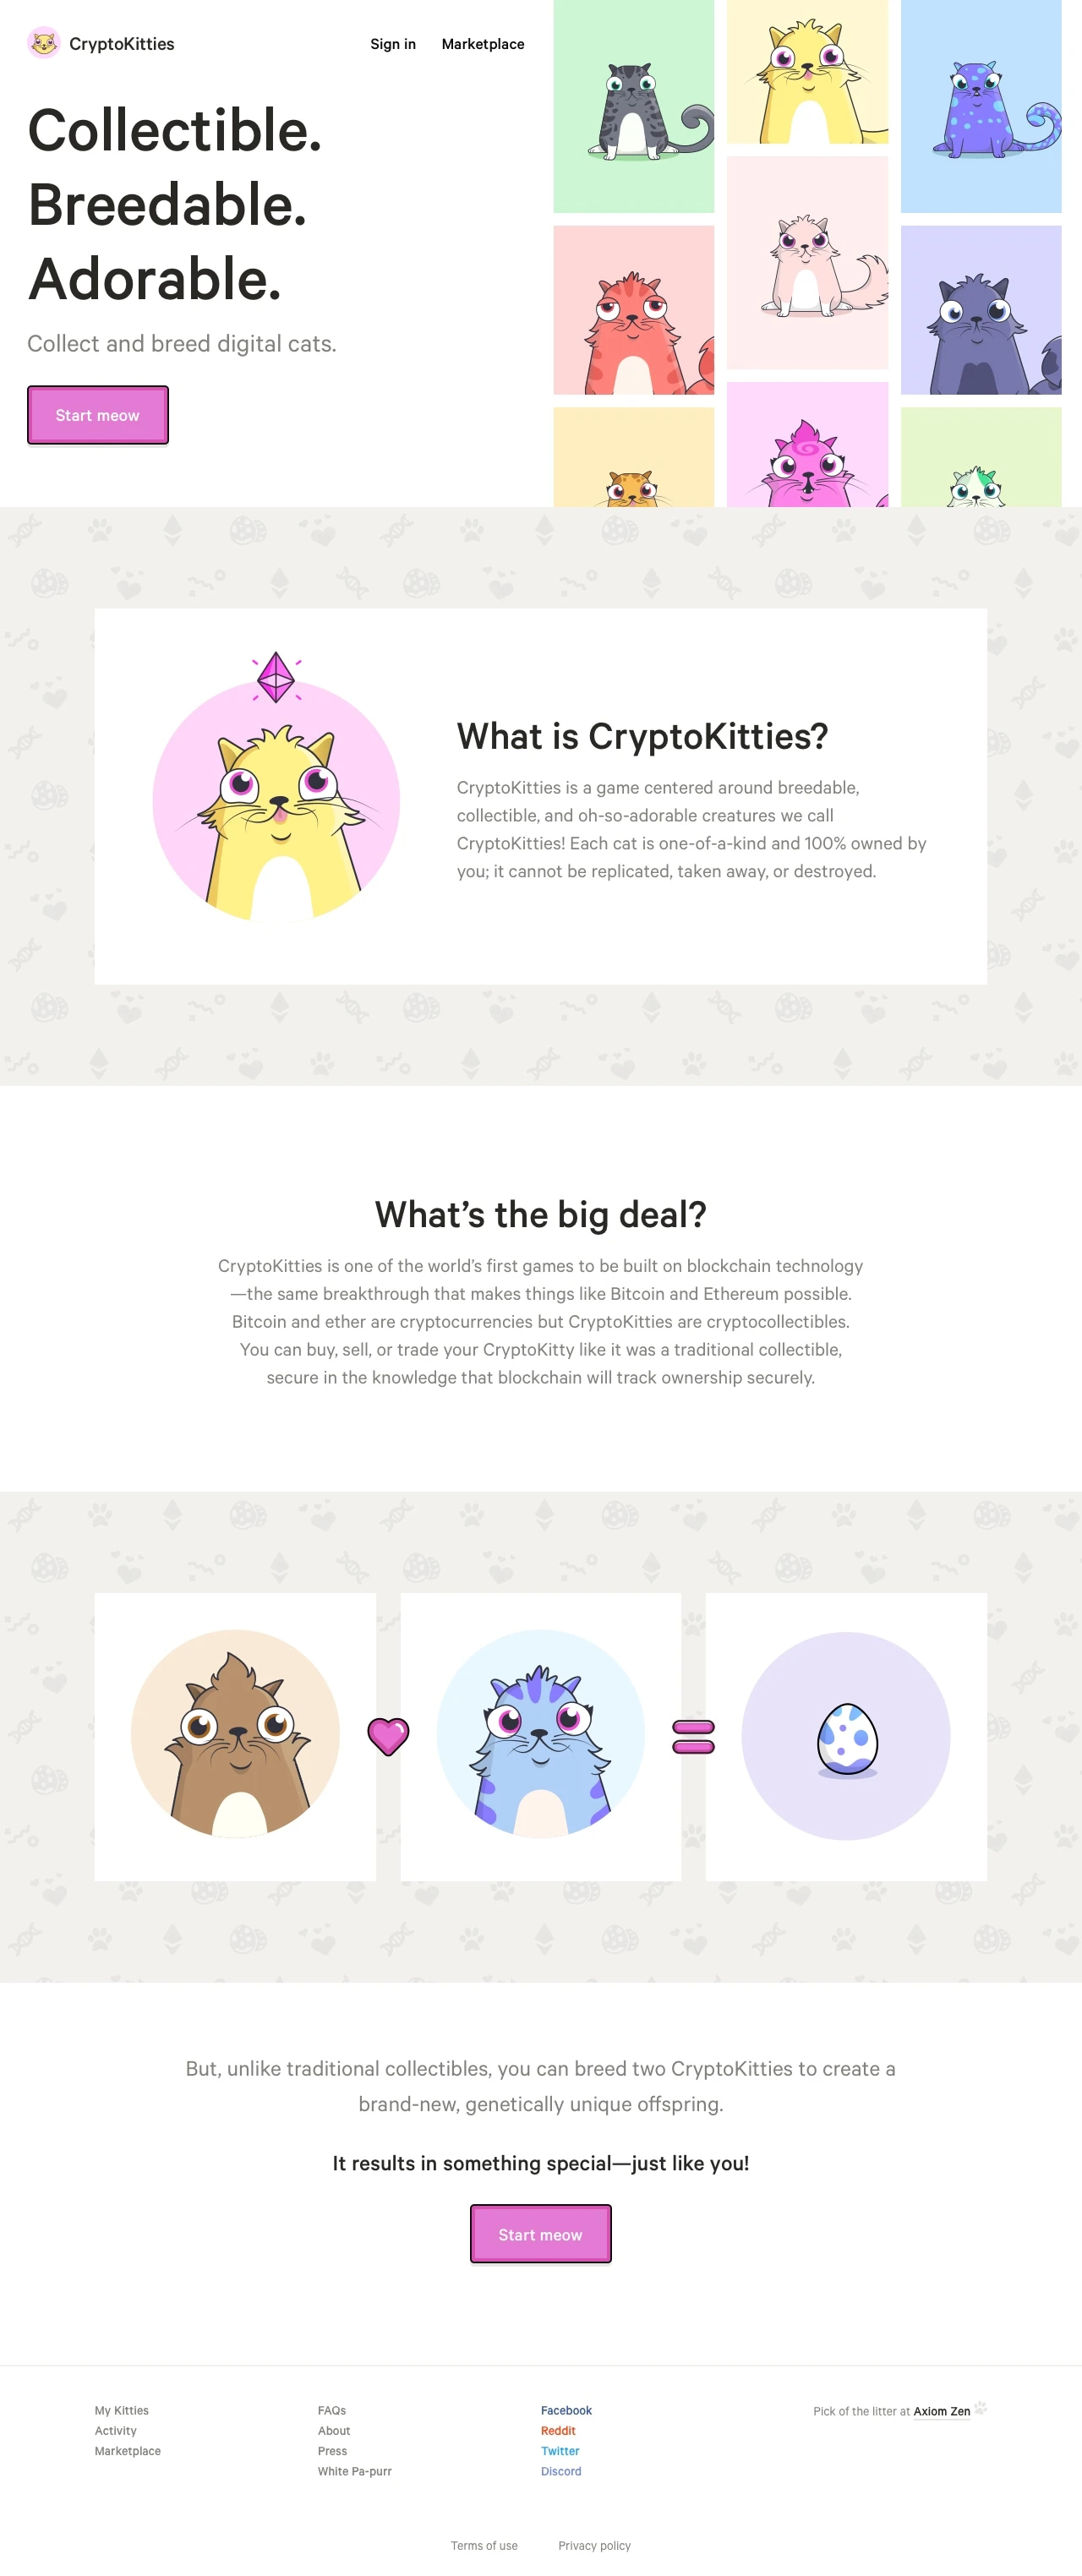 CryptoKitties Landing Page Example: Collect and trade CryptoKitties in one of the world's first blockchain games. Breed your rarest cats to create the purrfect furry friend. The future is meow!